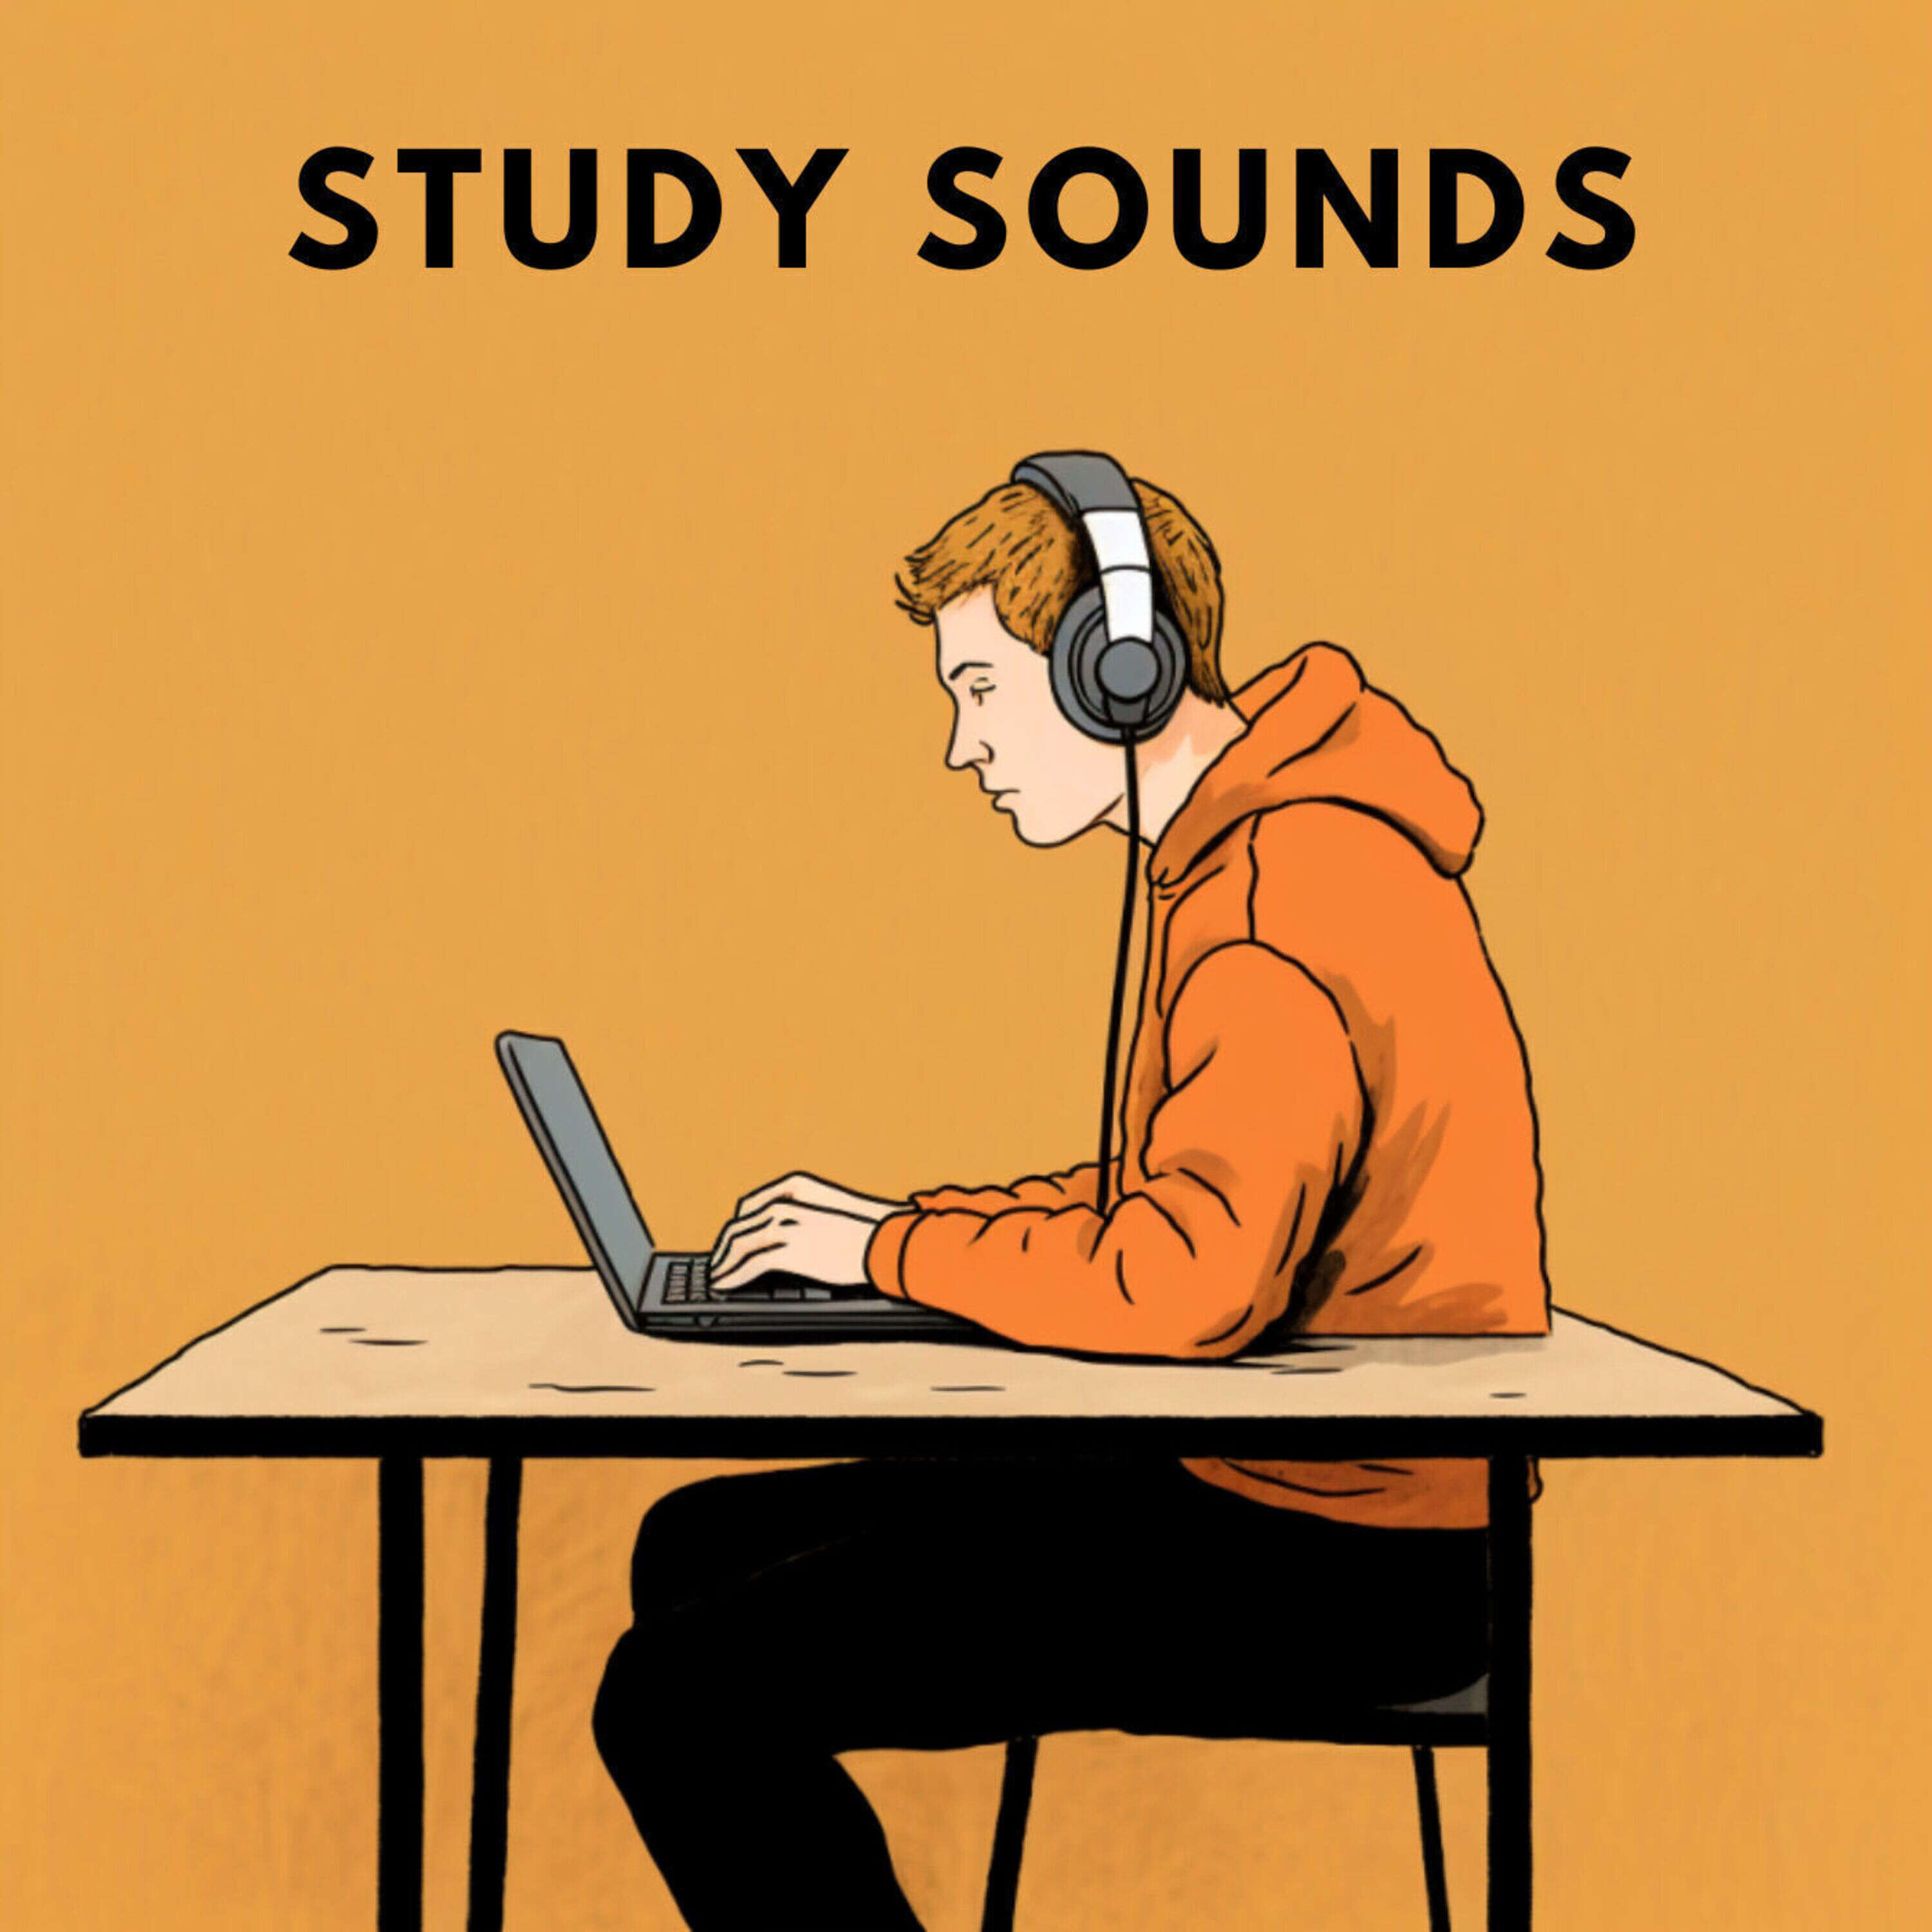 Study sounds - 1 Hour Of Deep Concentration sounds for Studying and Memorizing